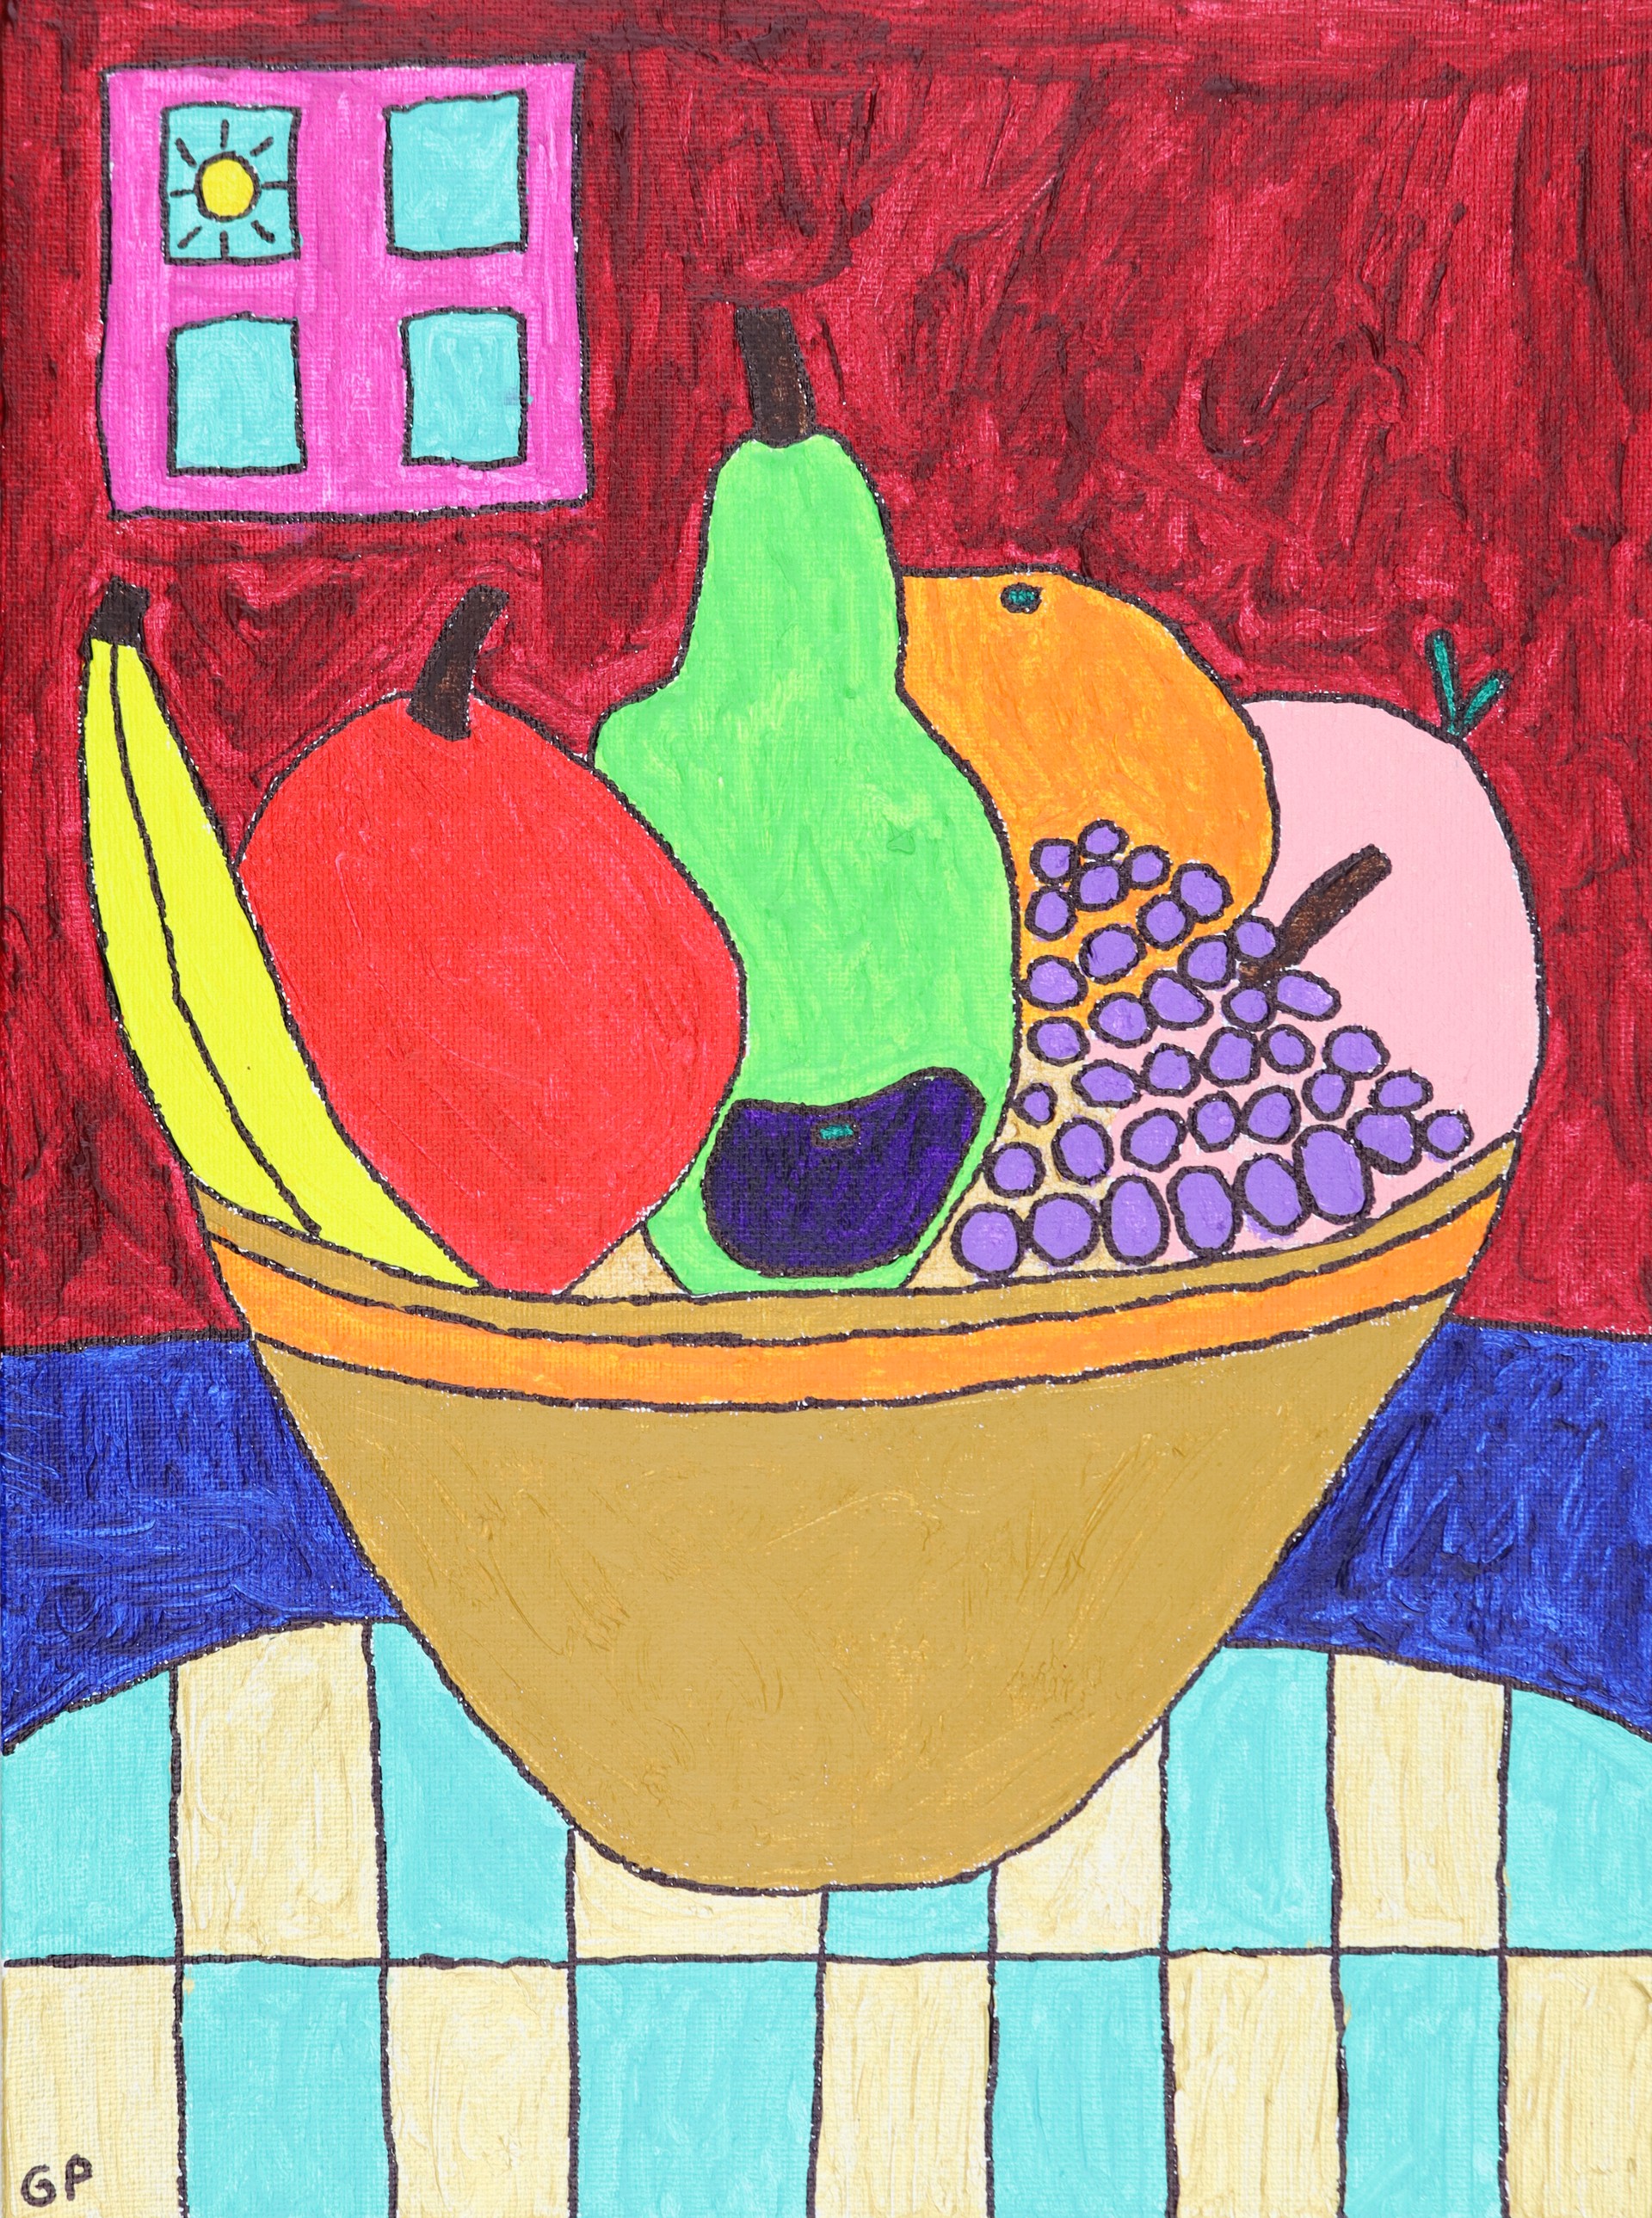 A Tasty Bowl of Fruit by Gillian Patterson